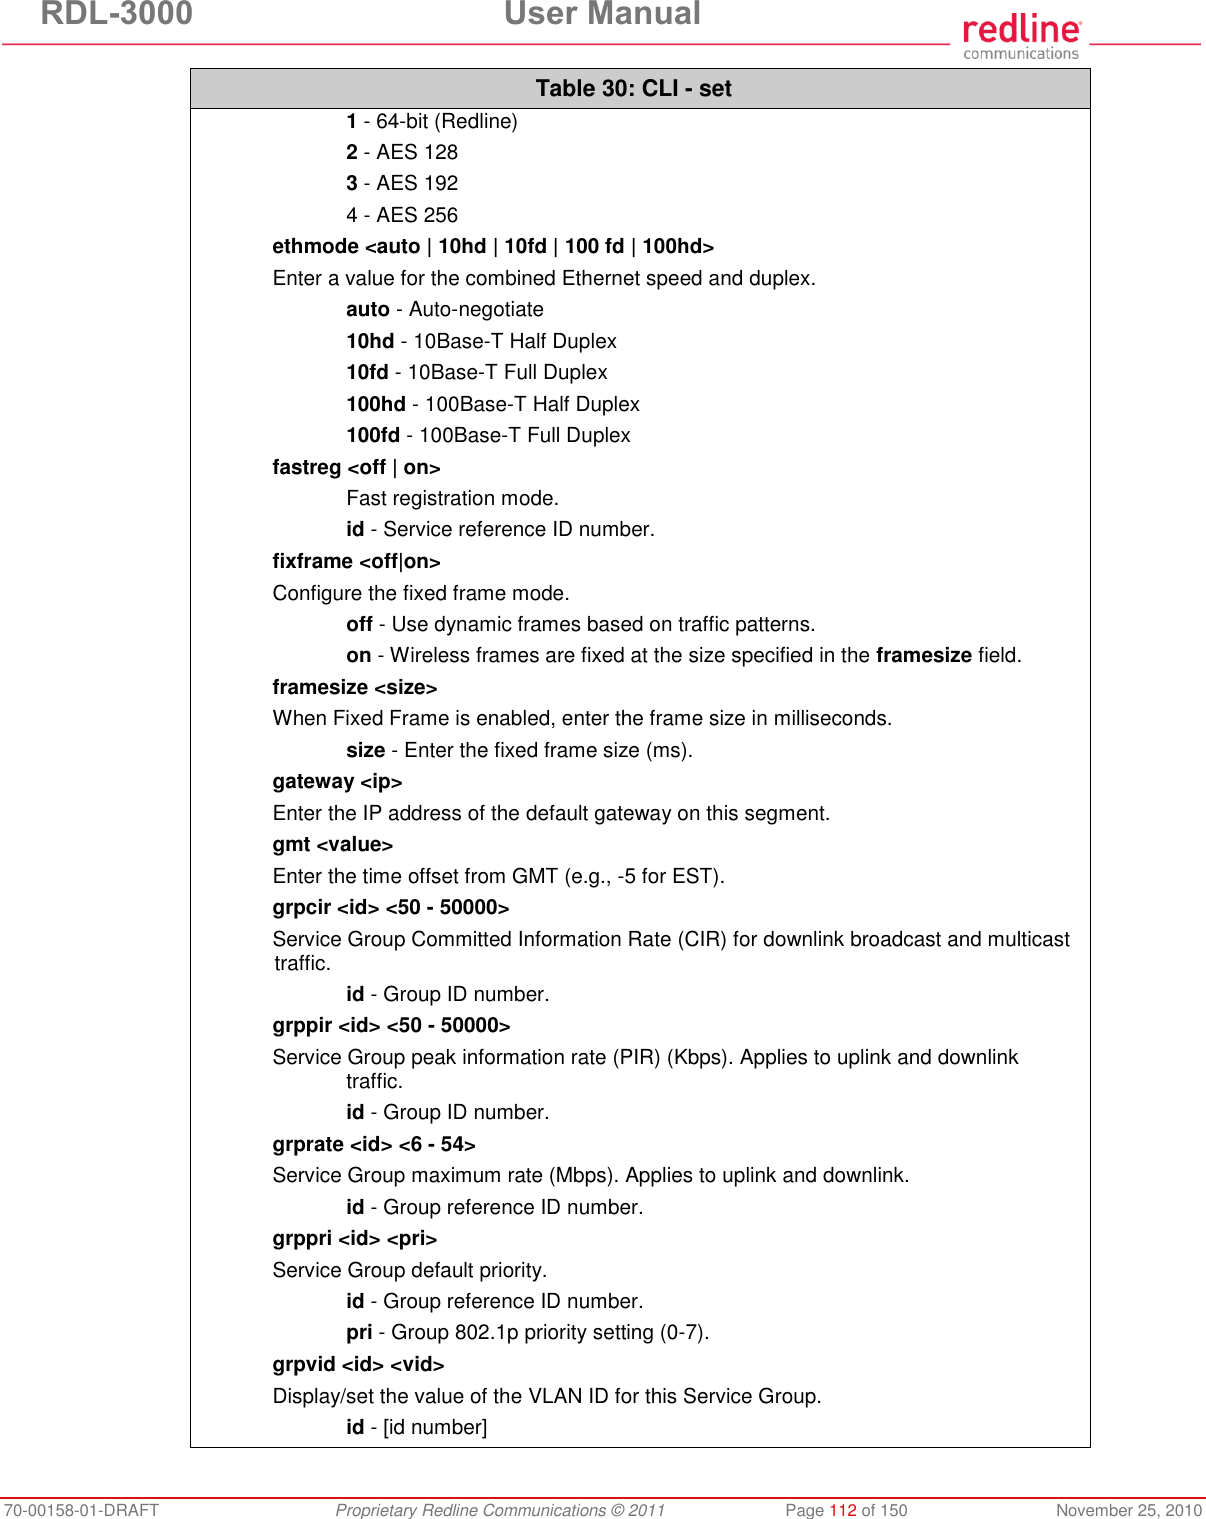 RDL-3000  User Manual 70-00158-01-DRAFT  Proprietary Redline Communications © 2011  Page 112 of 150  November 25, 2010 Table 30: CLI - set  1 - 64-bit (Redline)  2 - AES 128  3 - AES 192  4 - AES 256 ethmode &lt;auto | 10hd | 10fd | 100 fd | 100hd&gt; Enter a value for the combined Ethernet speed and duplex.  auto - Auto-negotiate  10hd - 10Base-T Half Duplex  10fd - 10Base-T Full Duplex  100hd - 100Base-T Half Duplex  100fd - 100Base-T Full Duplex fastreg &lt;off | on&gt;   Fast registration mode.  id - Service reference ID number. fixframe &lt;off|on&gt; Configure the fixed frame mode.  off - Use dynamic frames based on traffic patterns.  on - Wireless frames are fixed at the size specified in the framesize field. framesize &lt;size&gt; When Fixed Frame is enabled, enter the frame size in milliseconds.  size - Enter the fixed frame size (ms). gateway &lt;ip&gt; Enter the IP address of the default gateway on this segment. gmt &lt;value&gt; Enter the time offset from GMT (e.g., -5 for EST). grpcir &lt;id&gt; &lt;50 - 50000&gt; Service Group Committed Information Rate (CIR) for downlink broadcast and multicast traffic.  id - Group ID number. grppir &lt;id&gt; &lt;50 - 50000&gt; Service Group peak information rate (PIR) (Kbps). Applies to uplink and downlink traffic.  id - Group ID number. grprate &lt;id&gt; &lt;6 - 54&gt; Service Group maximum rate (Mbps). Applies to uplink and downlink.  id - Group reference ID number. grppri &lt;id&gt; &lt;pri&gt; Service Group default priority.  id - Group reference ID number.  pri - Group 802.1p priority setting (0-7). grpvid &lt;id&gt; &lt;vid&gt; Display/set the value of the VLAN ID for this Service Group.  id - [id number] 